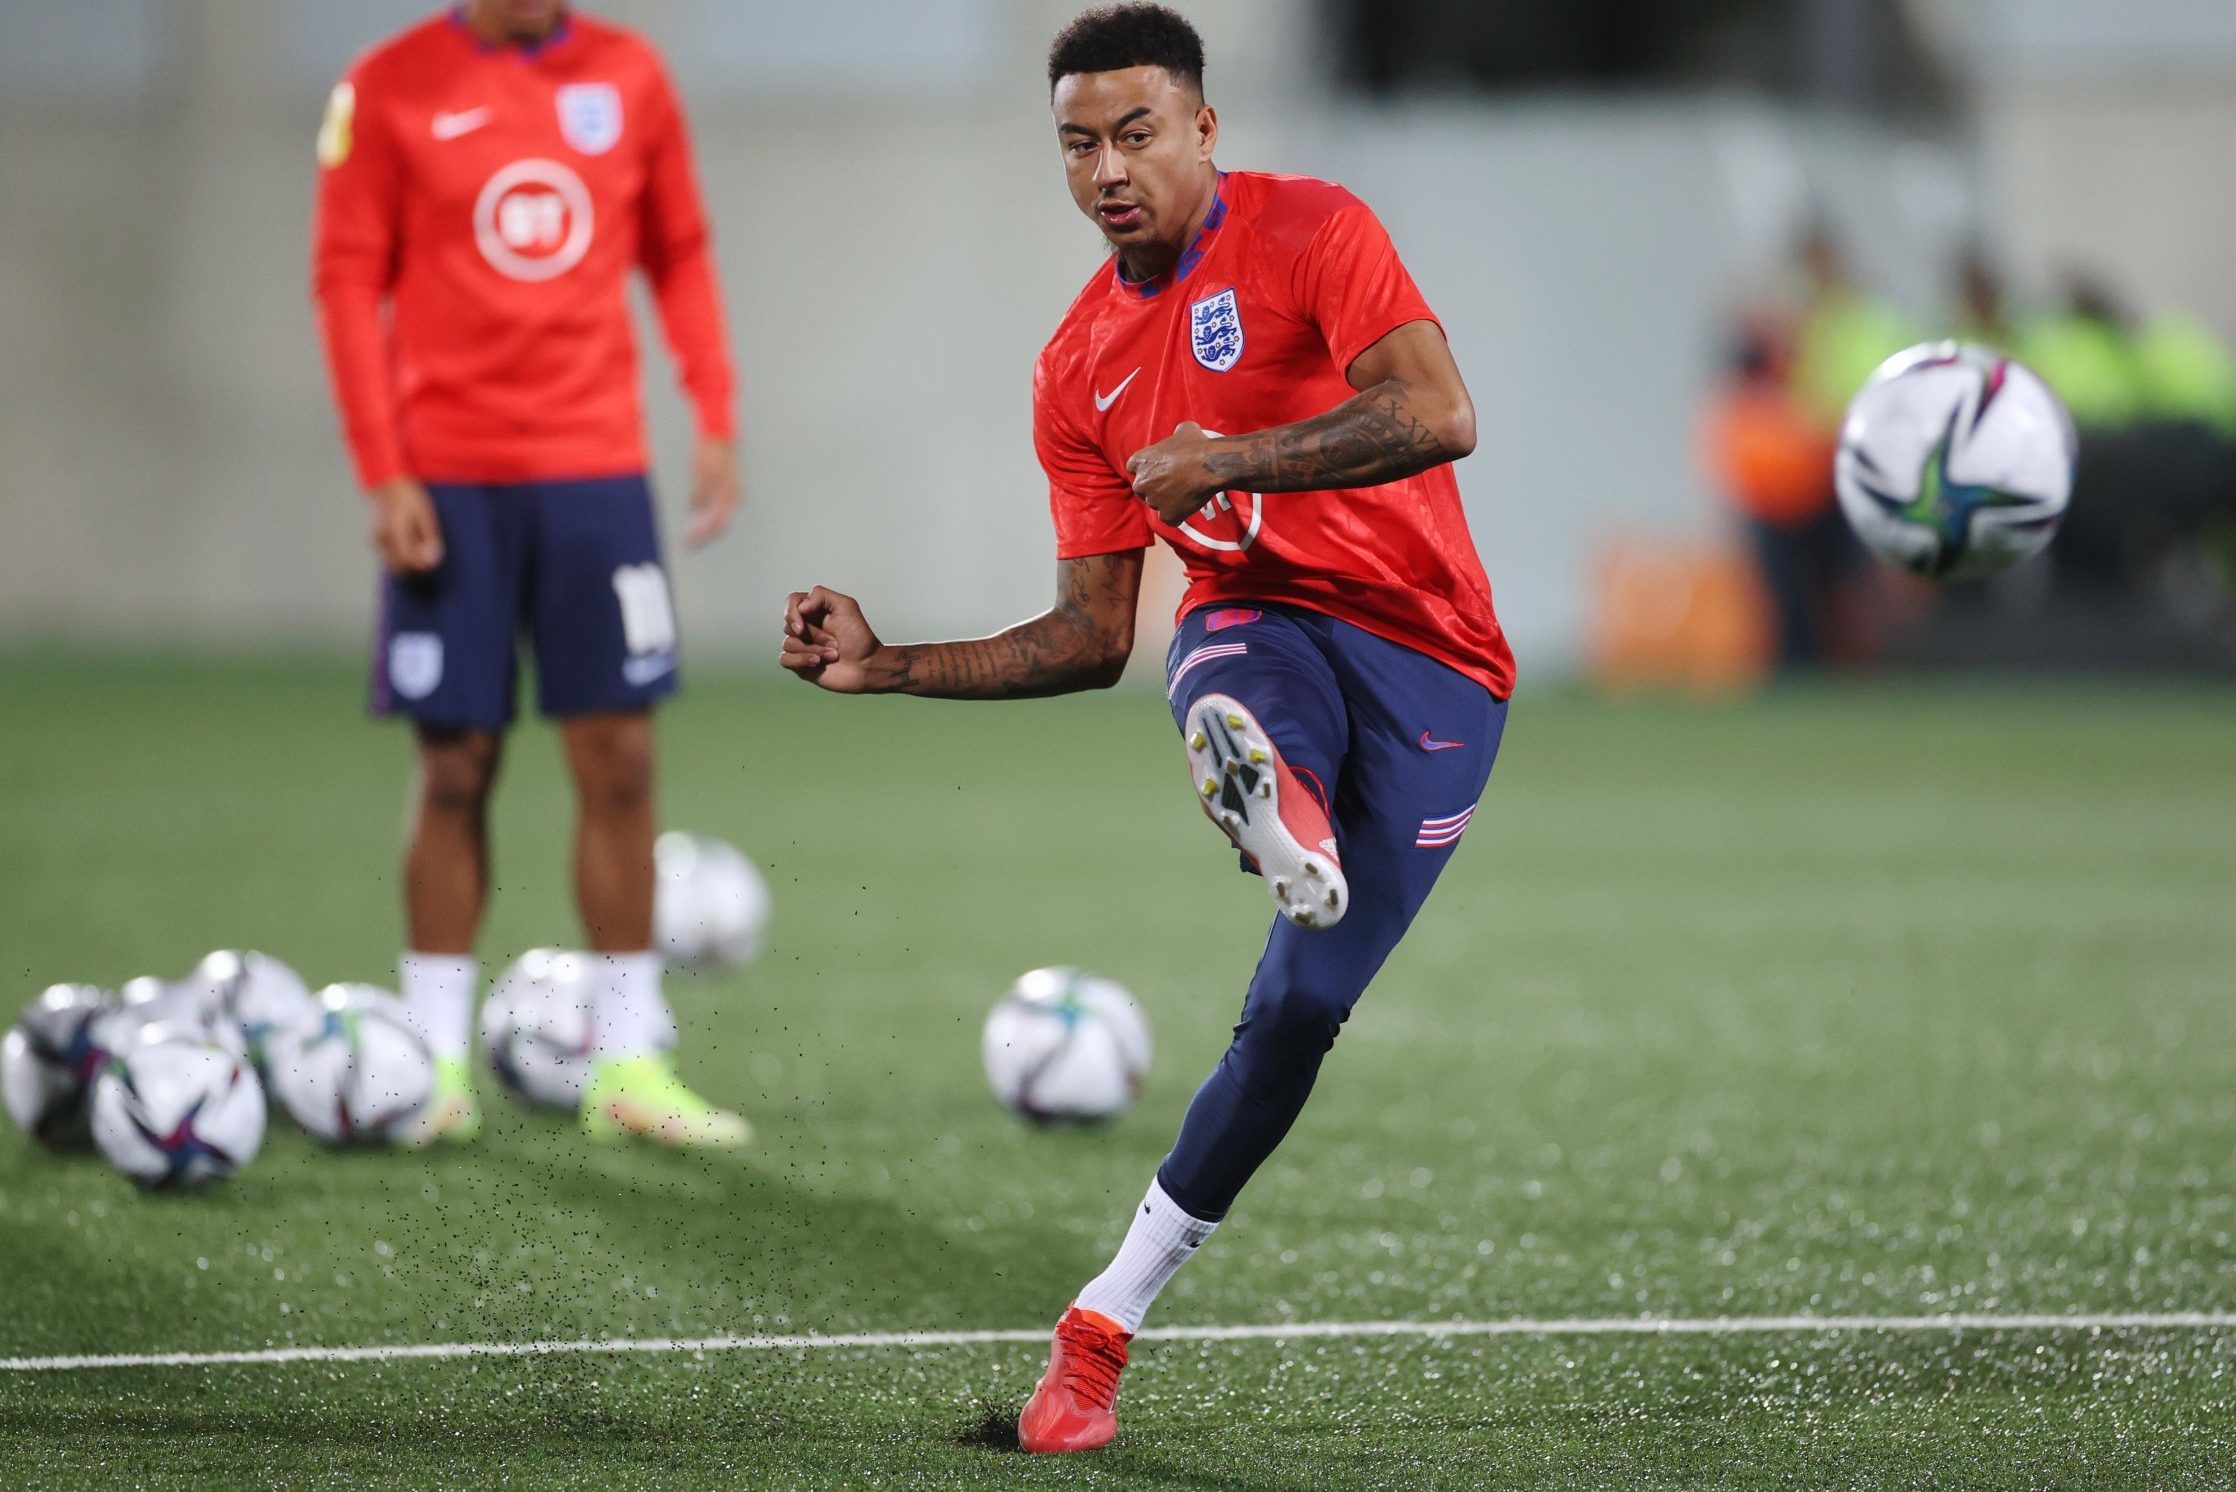 Man Utd midfielder Jesse Lingard during warm up for England before clash with Andorra